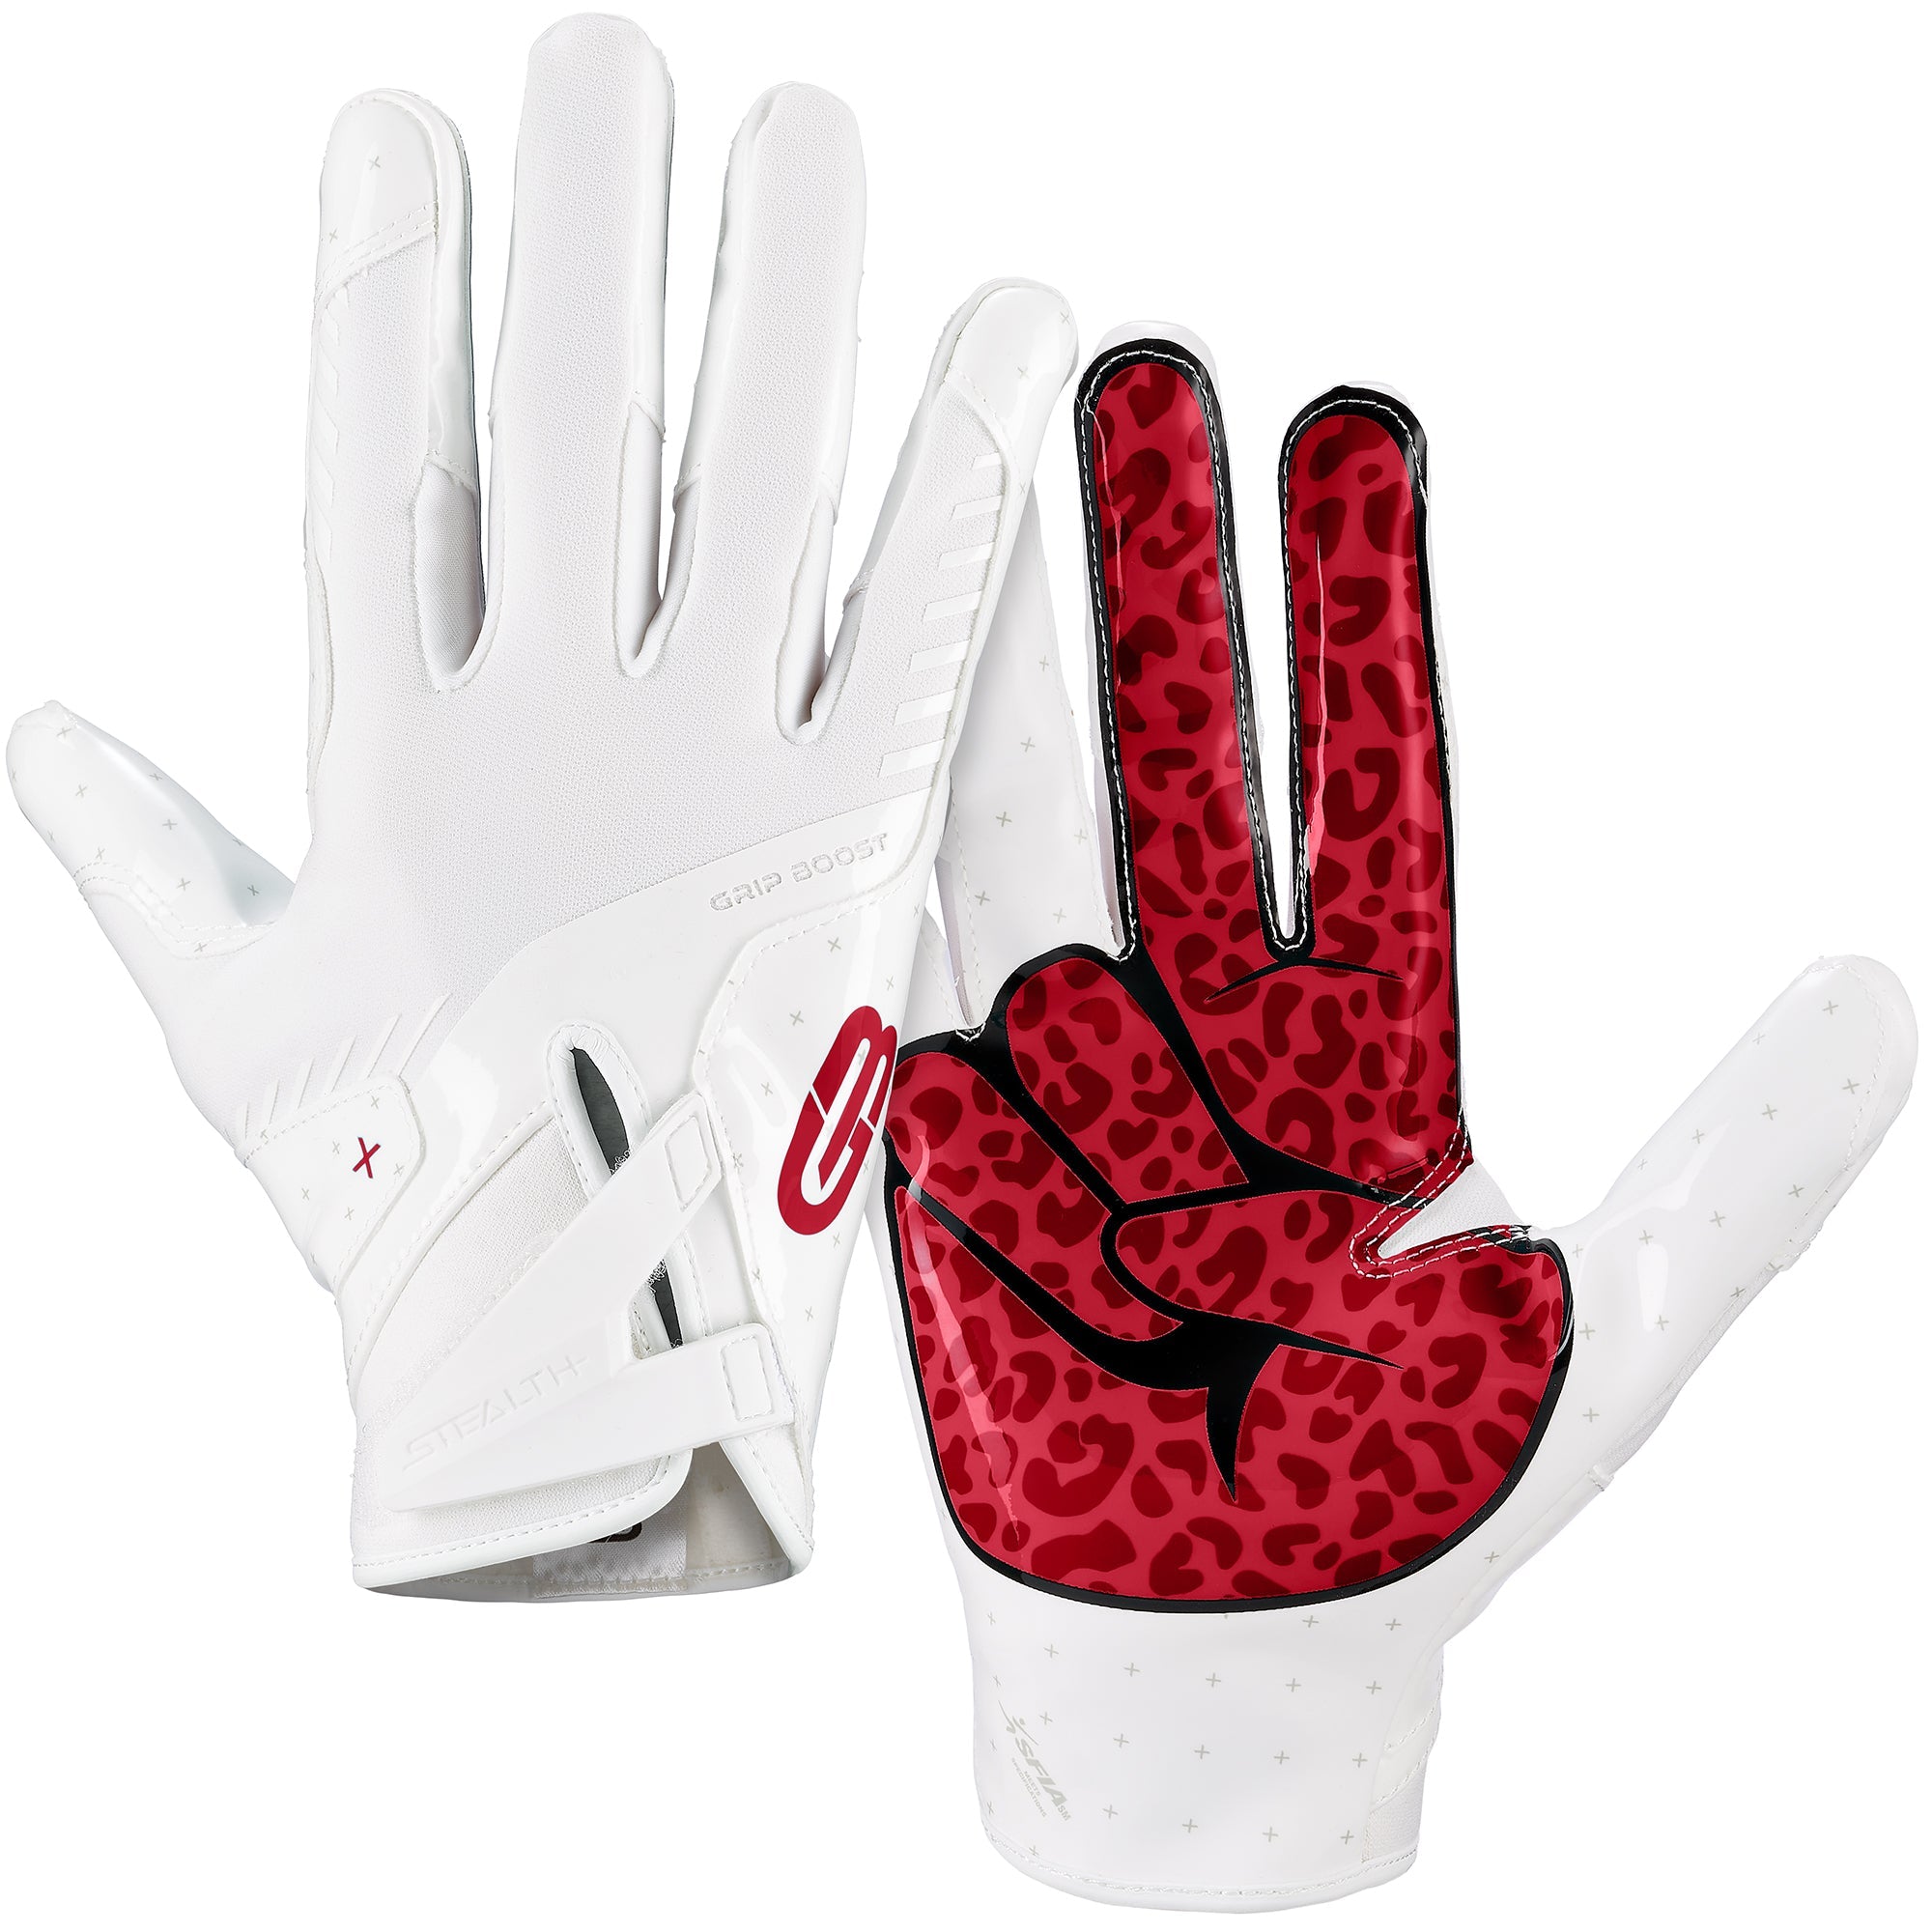 Grip Boost Peace Stealth 6 Boost Plus Youth Football Gloves - White/Crimson - Youth Small / White/Cr